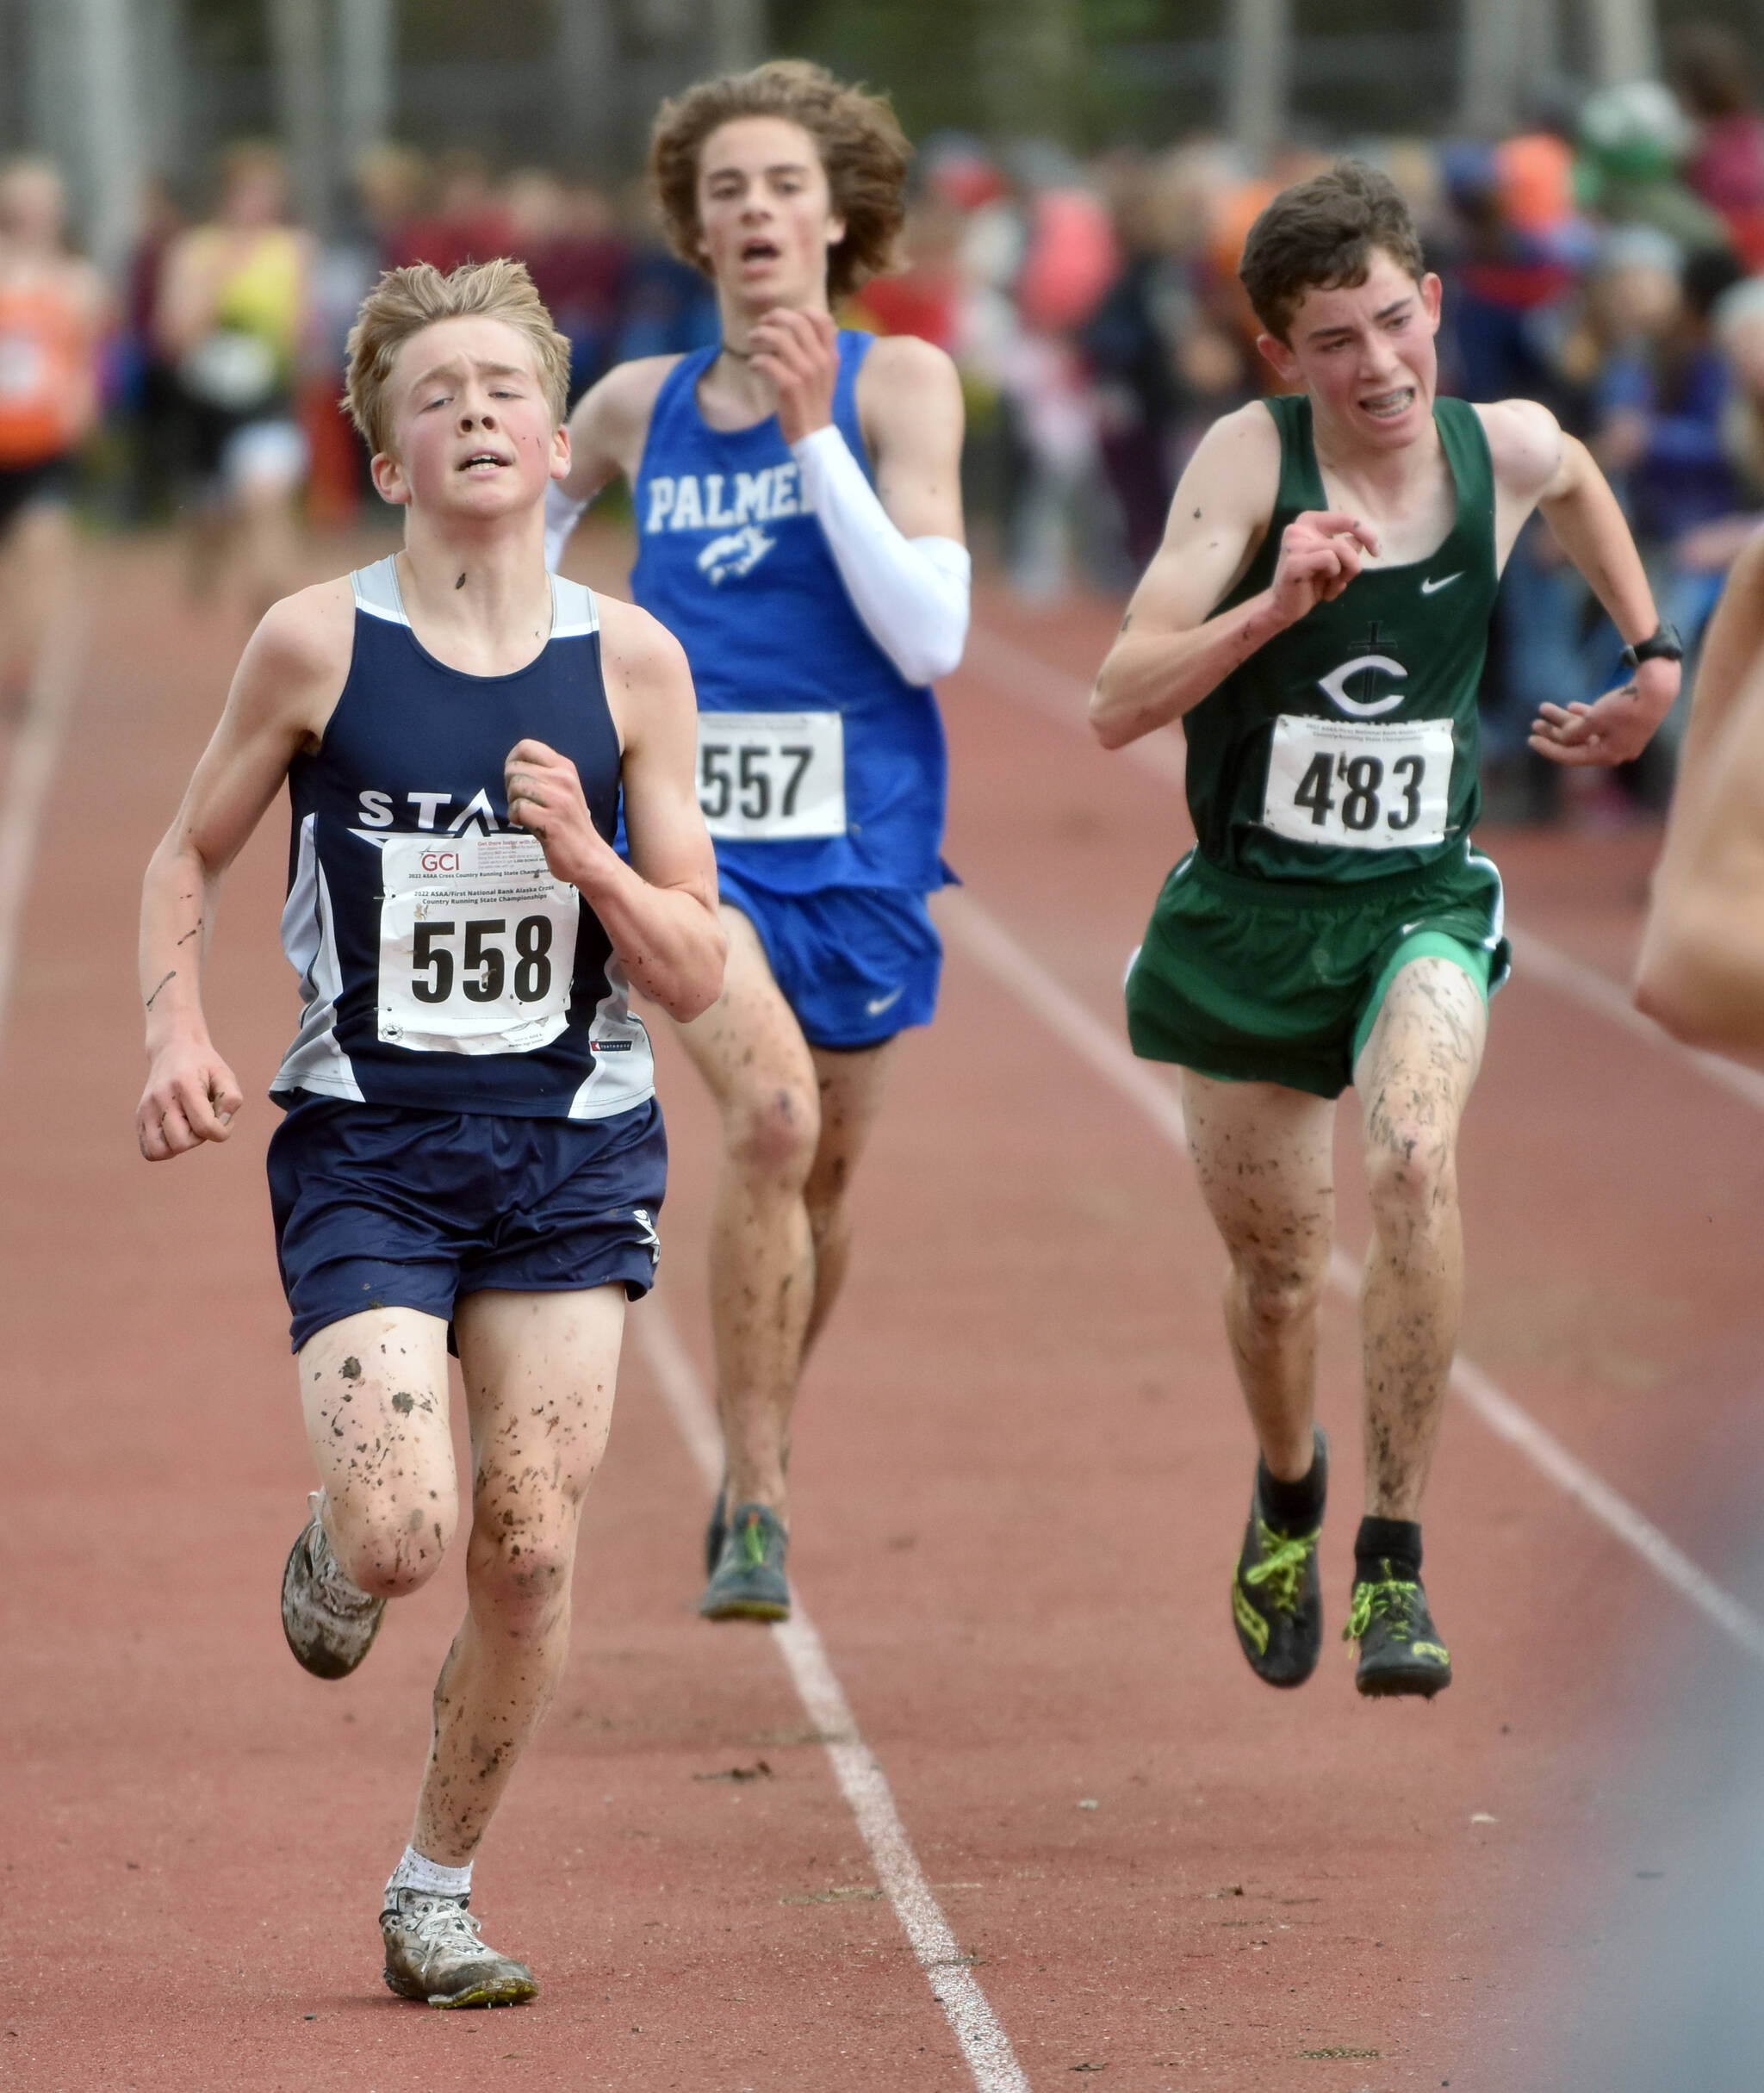 Soldotna’s Jacob Strausbaugh, Palmer’s Tobin Miller and Colony’s Coby Marvin sprint for the finish in the Division I boys race at the state cross-country meet Saturday, Oct. 8, 2022, at Bartlett High School in Anchorage, Alaska. (Photo by Jeff Helminiak/Peninsula Clarion)